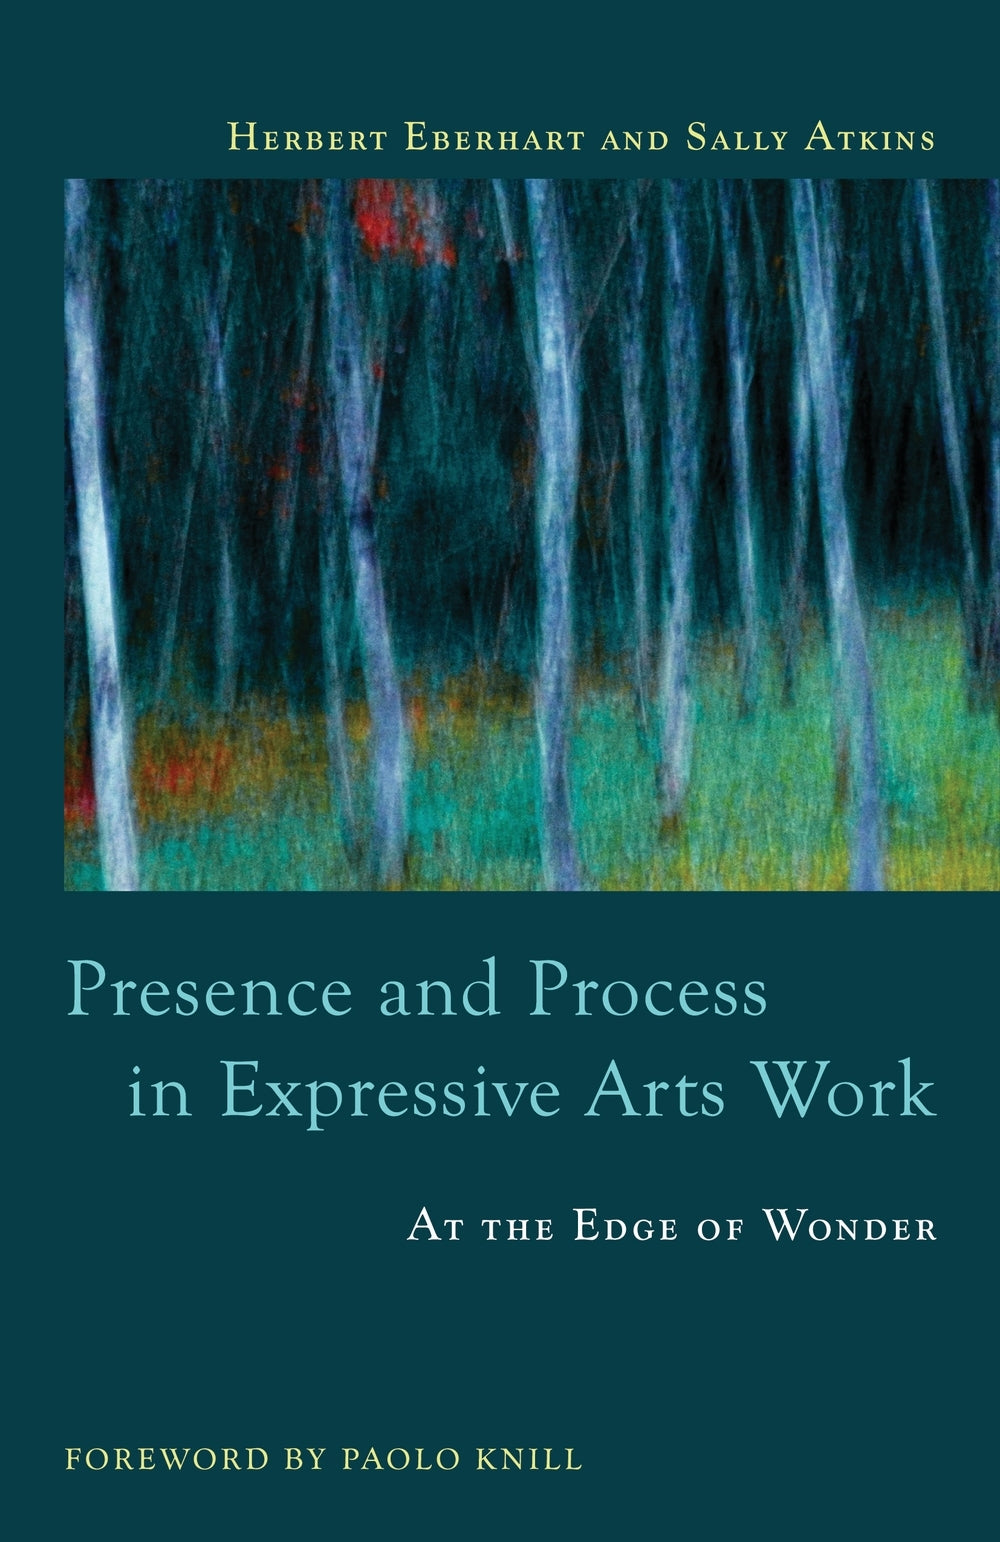 Presence and Process in Expressive Arts Work by Sally Atkins, Paolo J. Knill, Herbert Eberhart